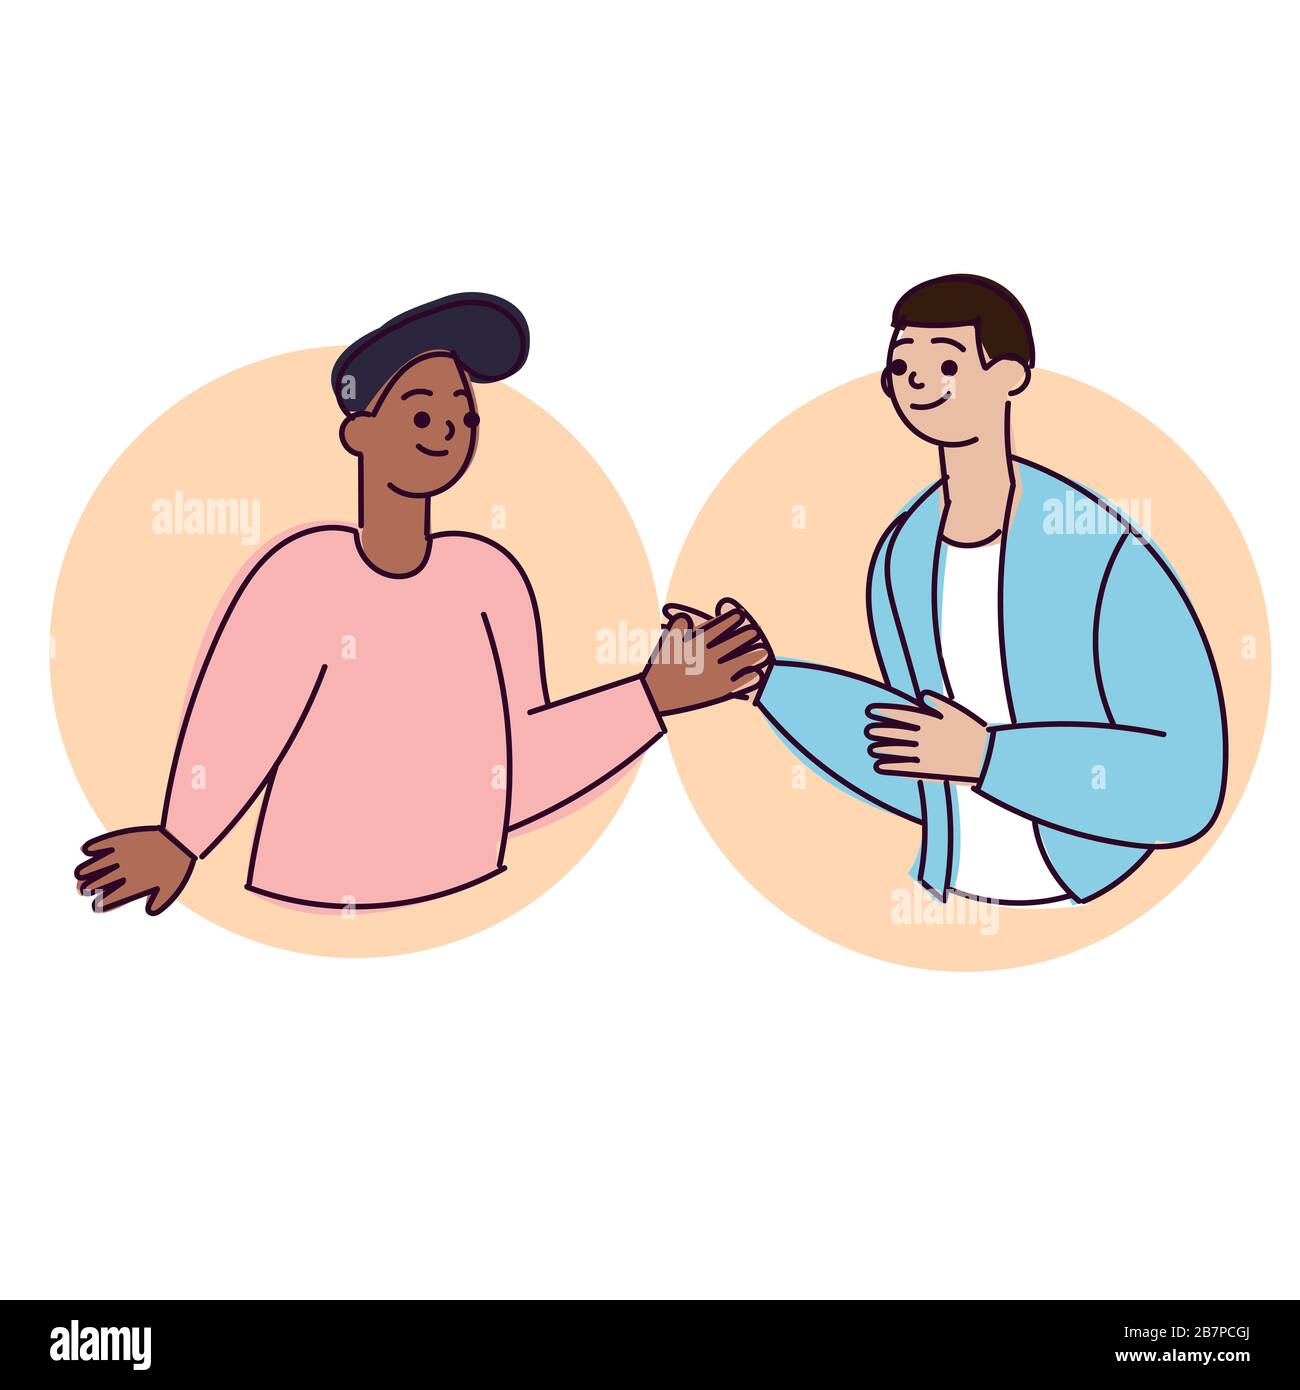 Smiling two cheerful young man waving , touching hands ,clapping hands and say Hello with colleague.Two friends man meeting giving high five. People Stock Vector